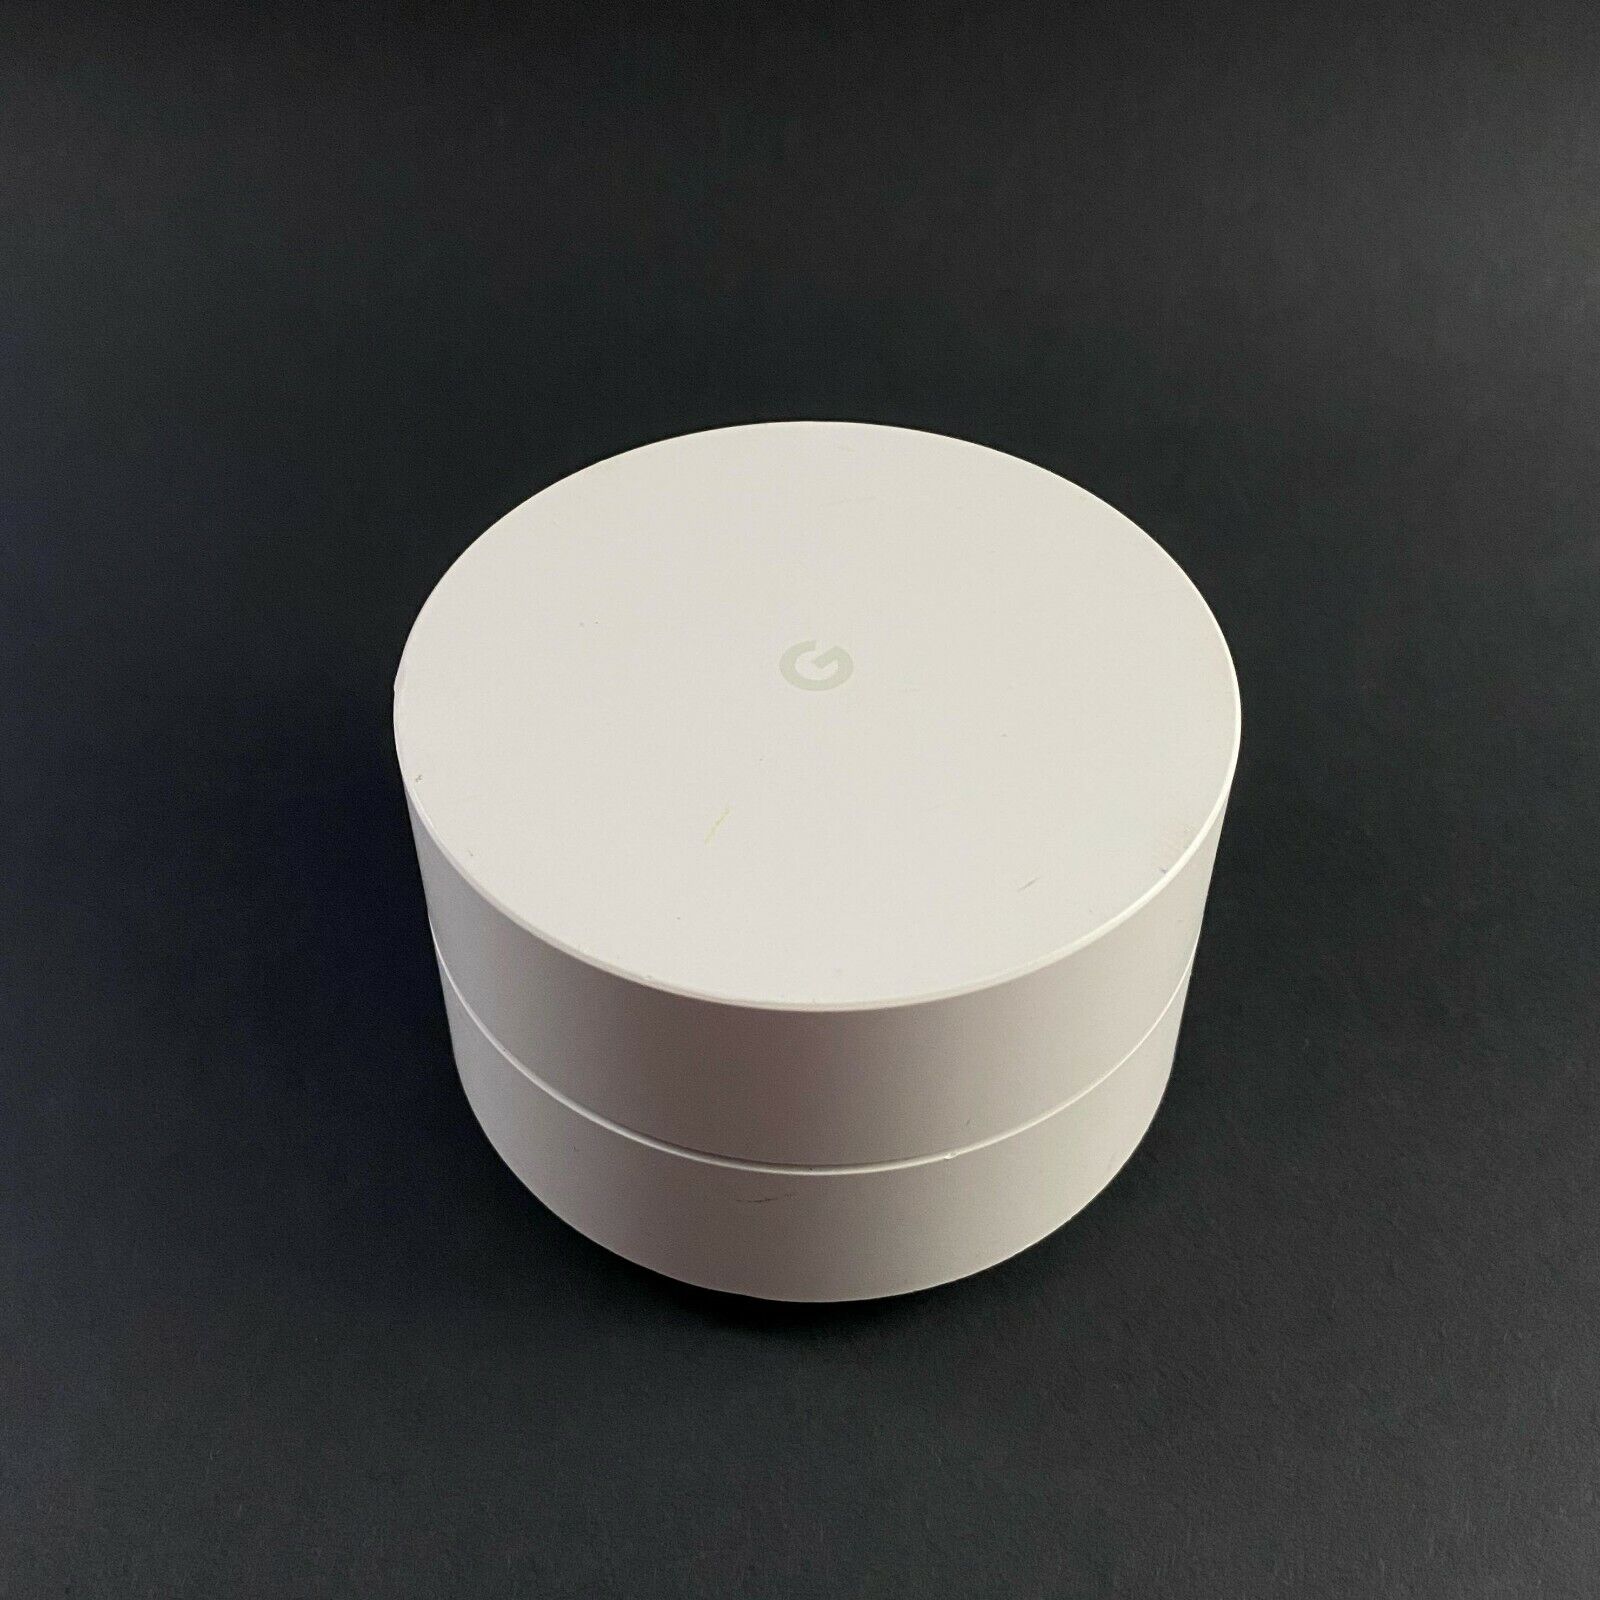 Google WiFi - Mesh WiFi System - WiFi Router Replacement - 3 Pack (Renewed)